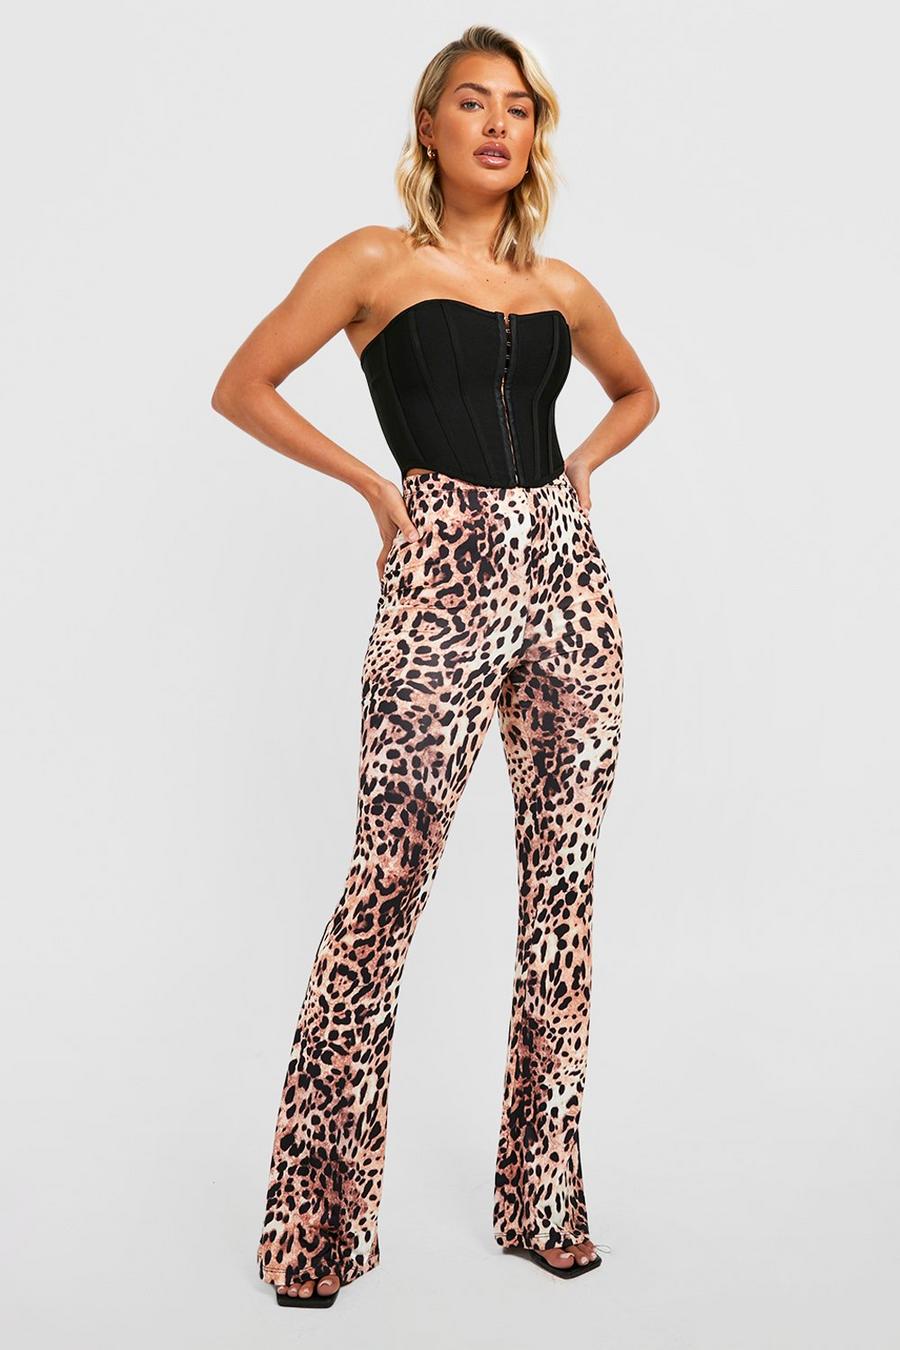 Tan Leopard Print Slinky Flared Trousers image number 1